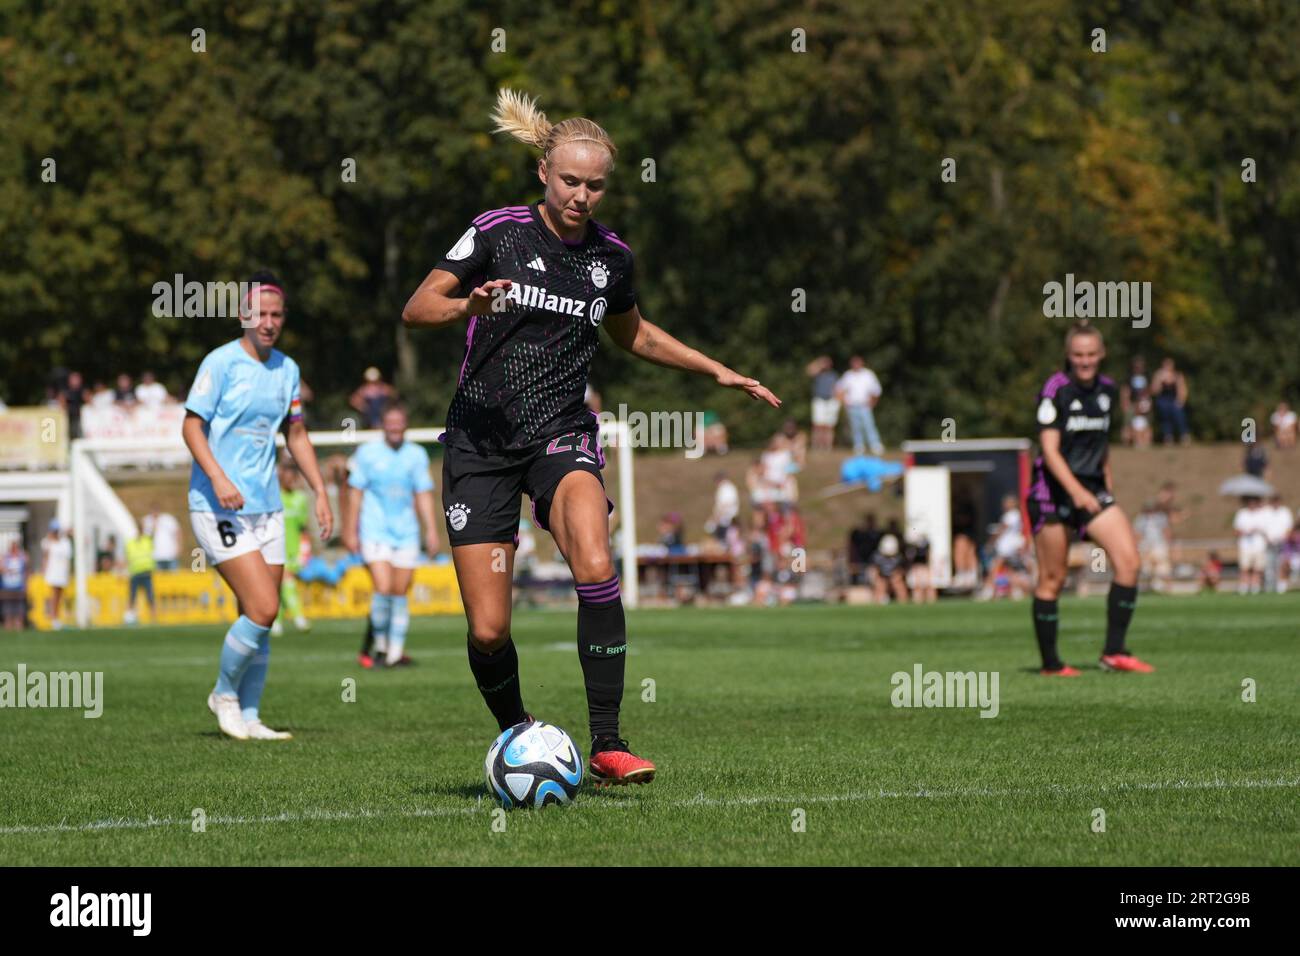 Andernach, Germany. 10th Sep, 2023. Andernach, Germany, September 10th 2023: Pernille Harder ( 21 Bayern ) during the DFB Pokal football match between SG 99 Andernach and FC Bayern München at Stadion Andernach in Andernach, Germany. (Julia Kneissl/SPP) Credit: SPP Sport Press Photo. /Alamy Live News Stock Photo